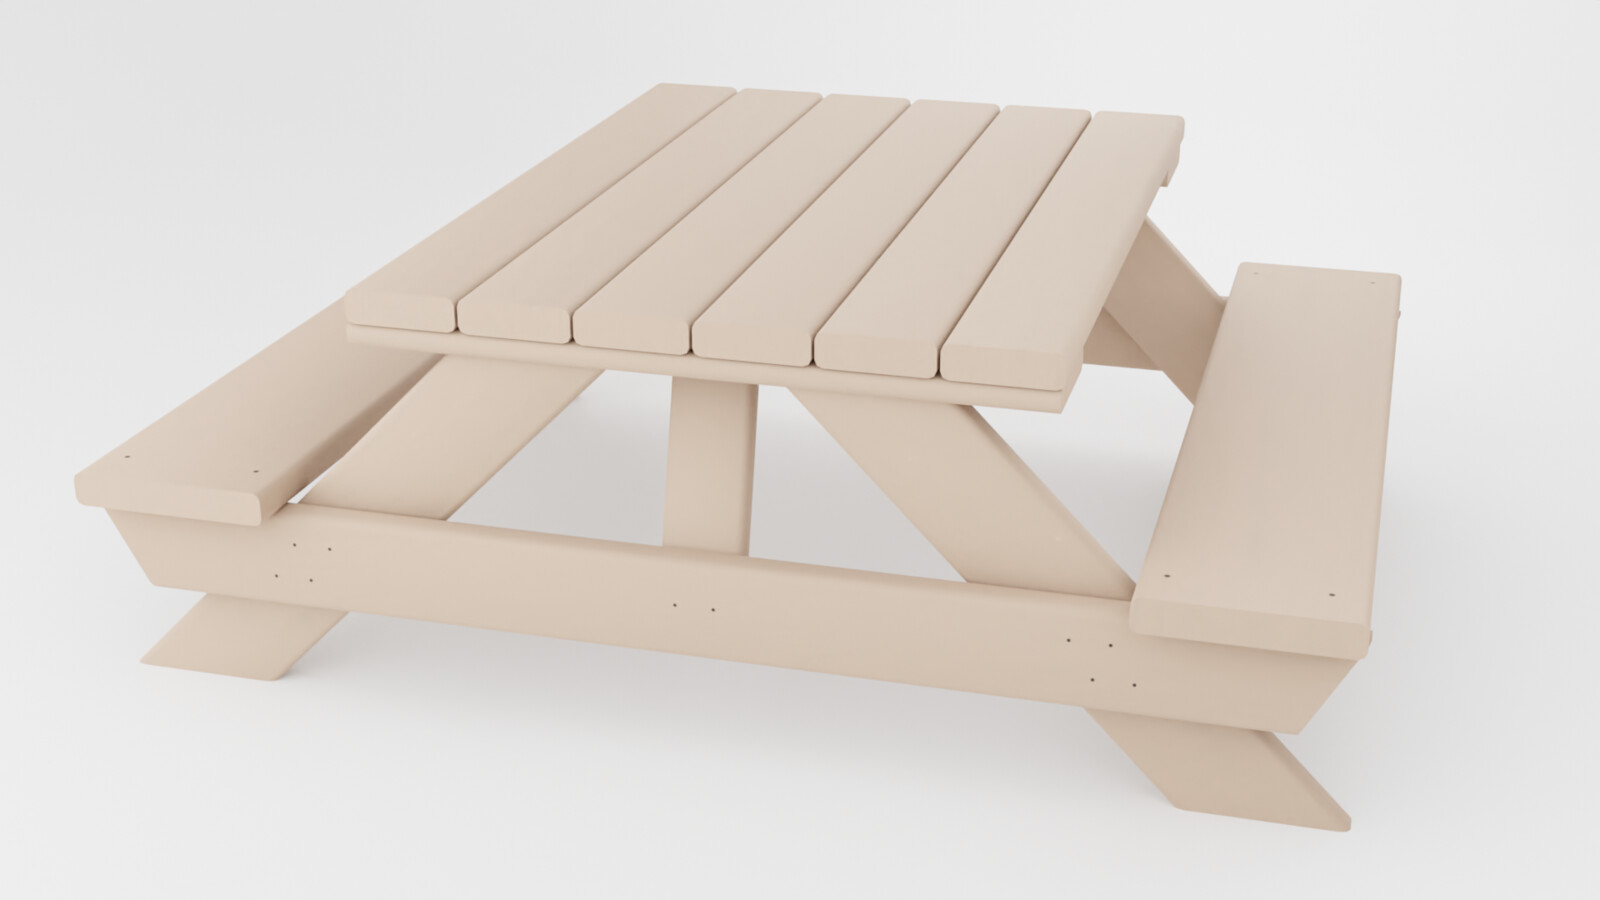 Picnic Table render 2